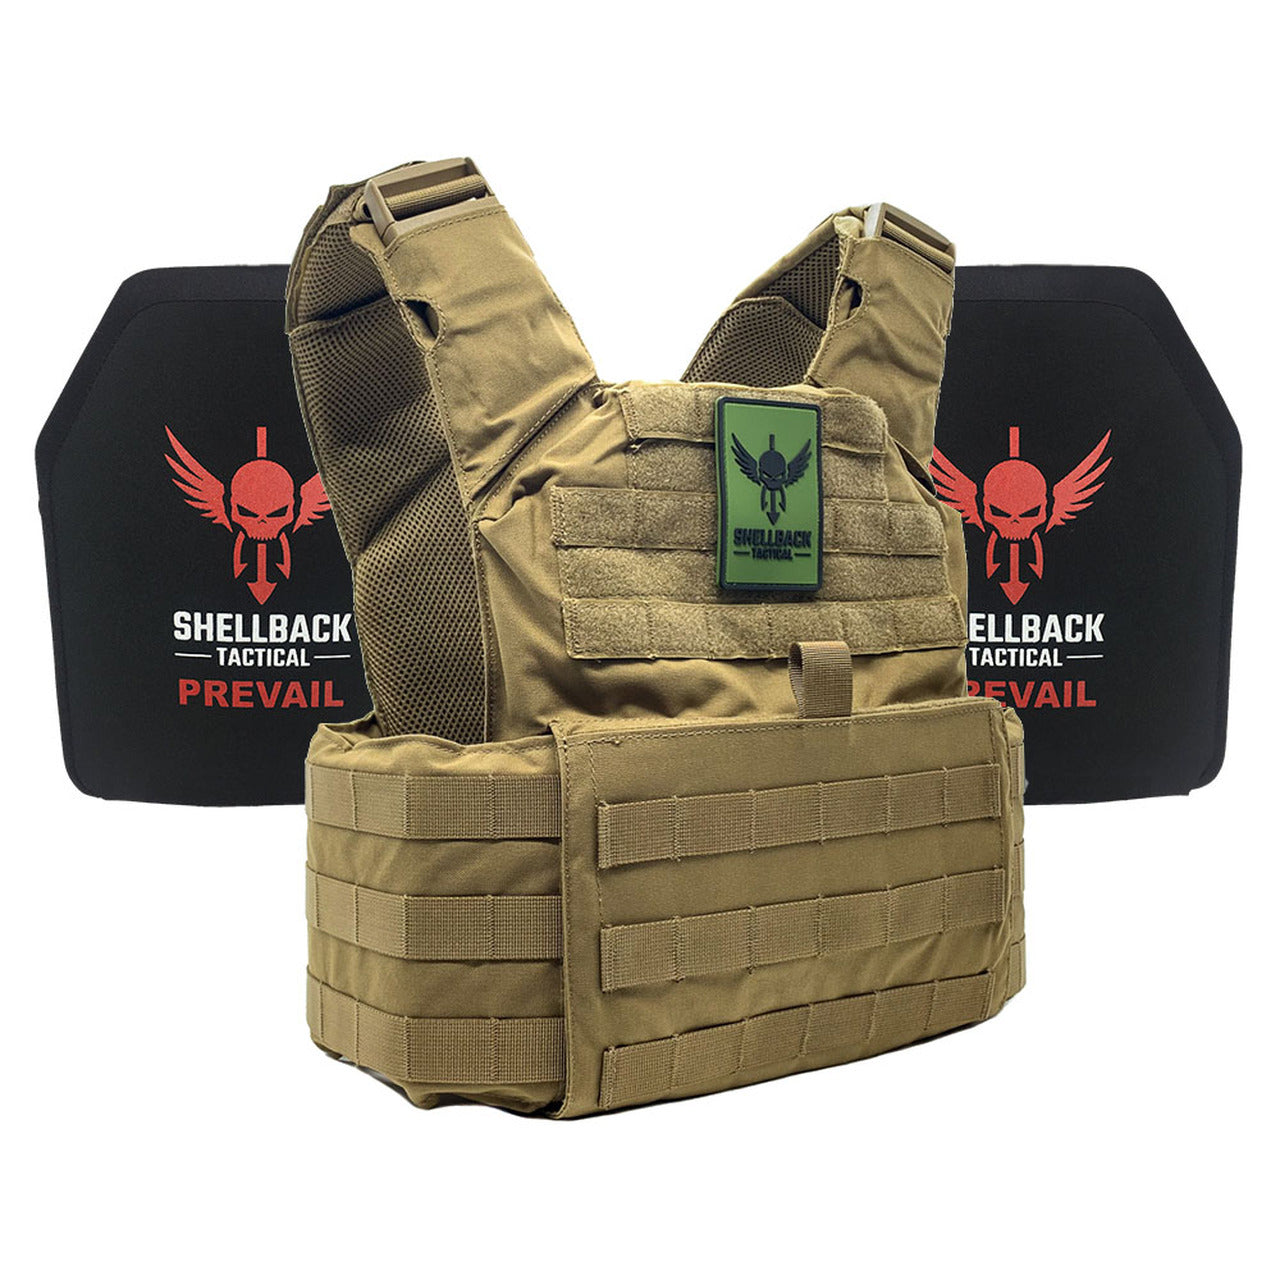 A Shellback Tactical Skirmish Active Shooter Kit with Level IV 1155 Plates plate carrier with a red shield on it.